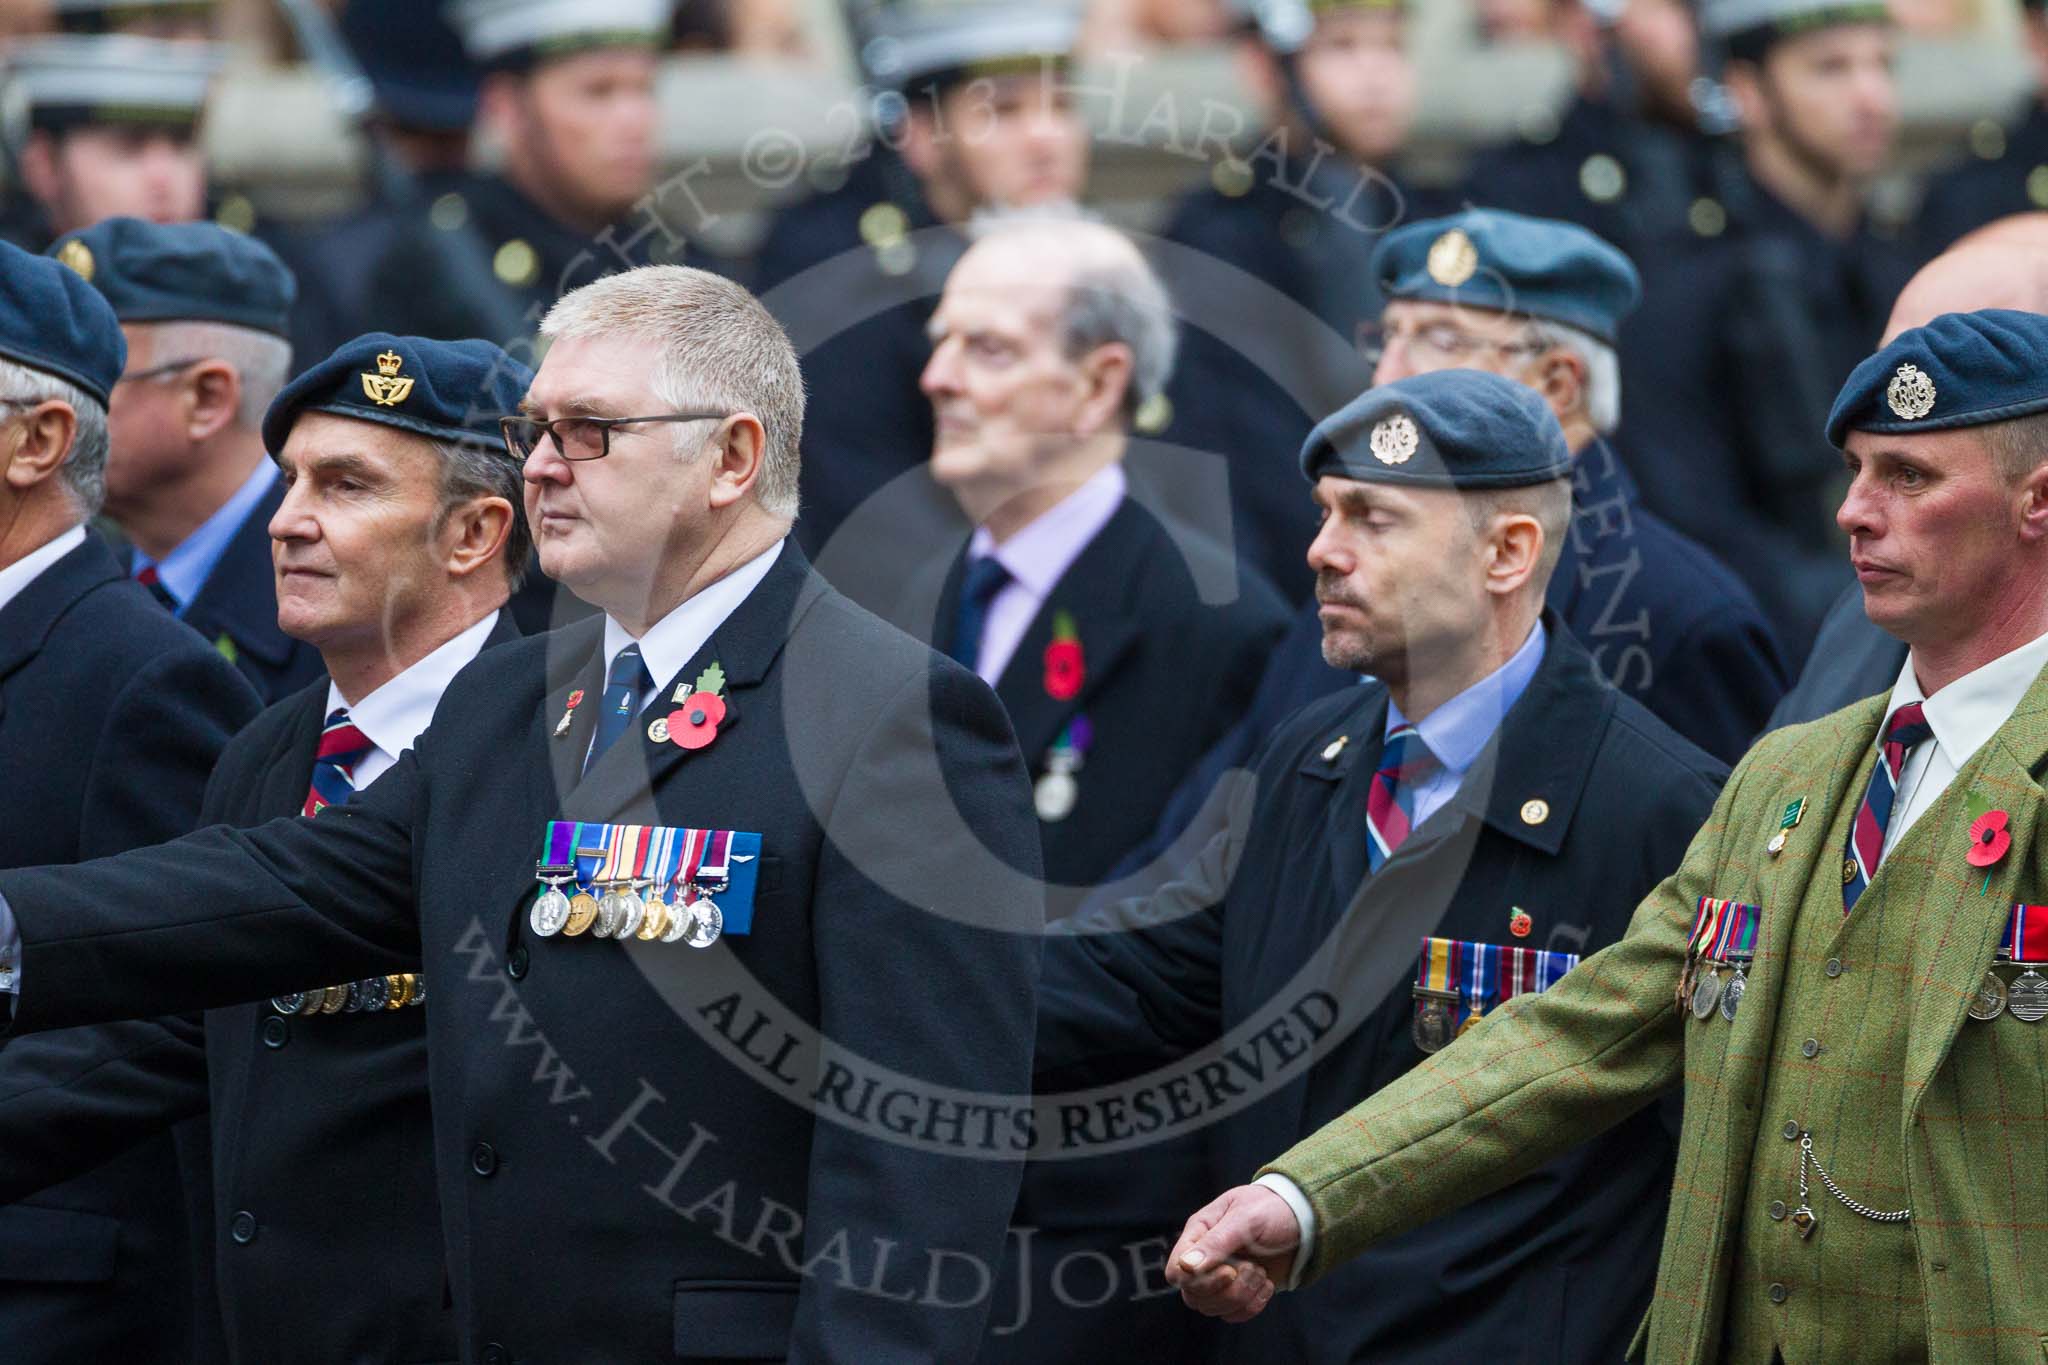 Remembrance Sunday at the Cenotaph 2015: Group C16, RAFSE(s) Assoc (New for 2015).
Cenotaph, Whitehall, London SW1,
London,
Greater London,
United Kingdom,
on 08 November 2015 at 11:49, image #518